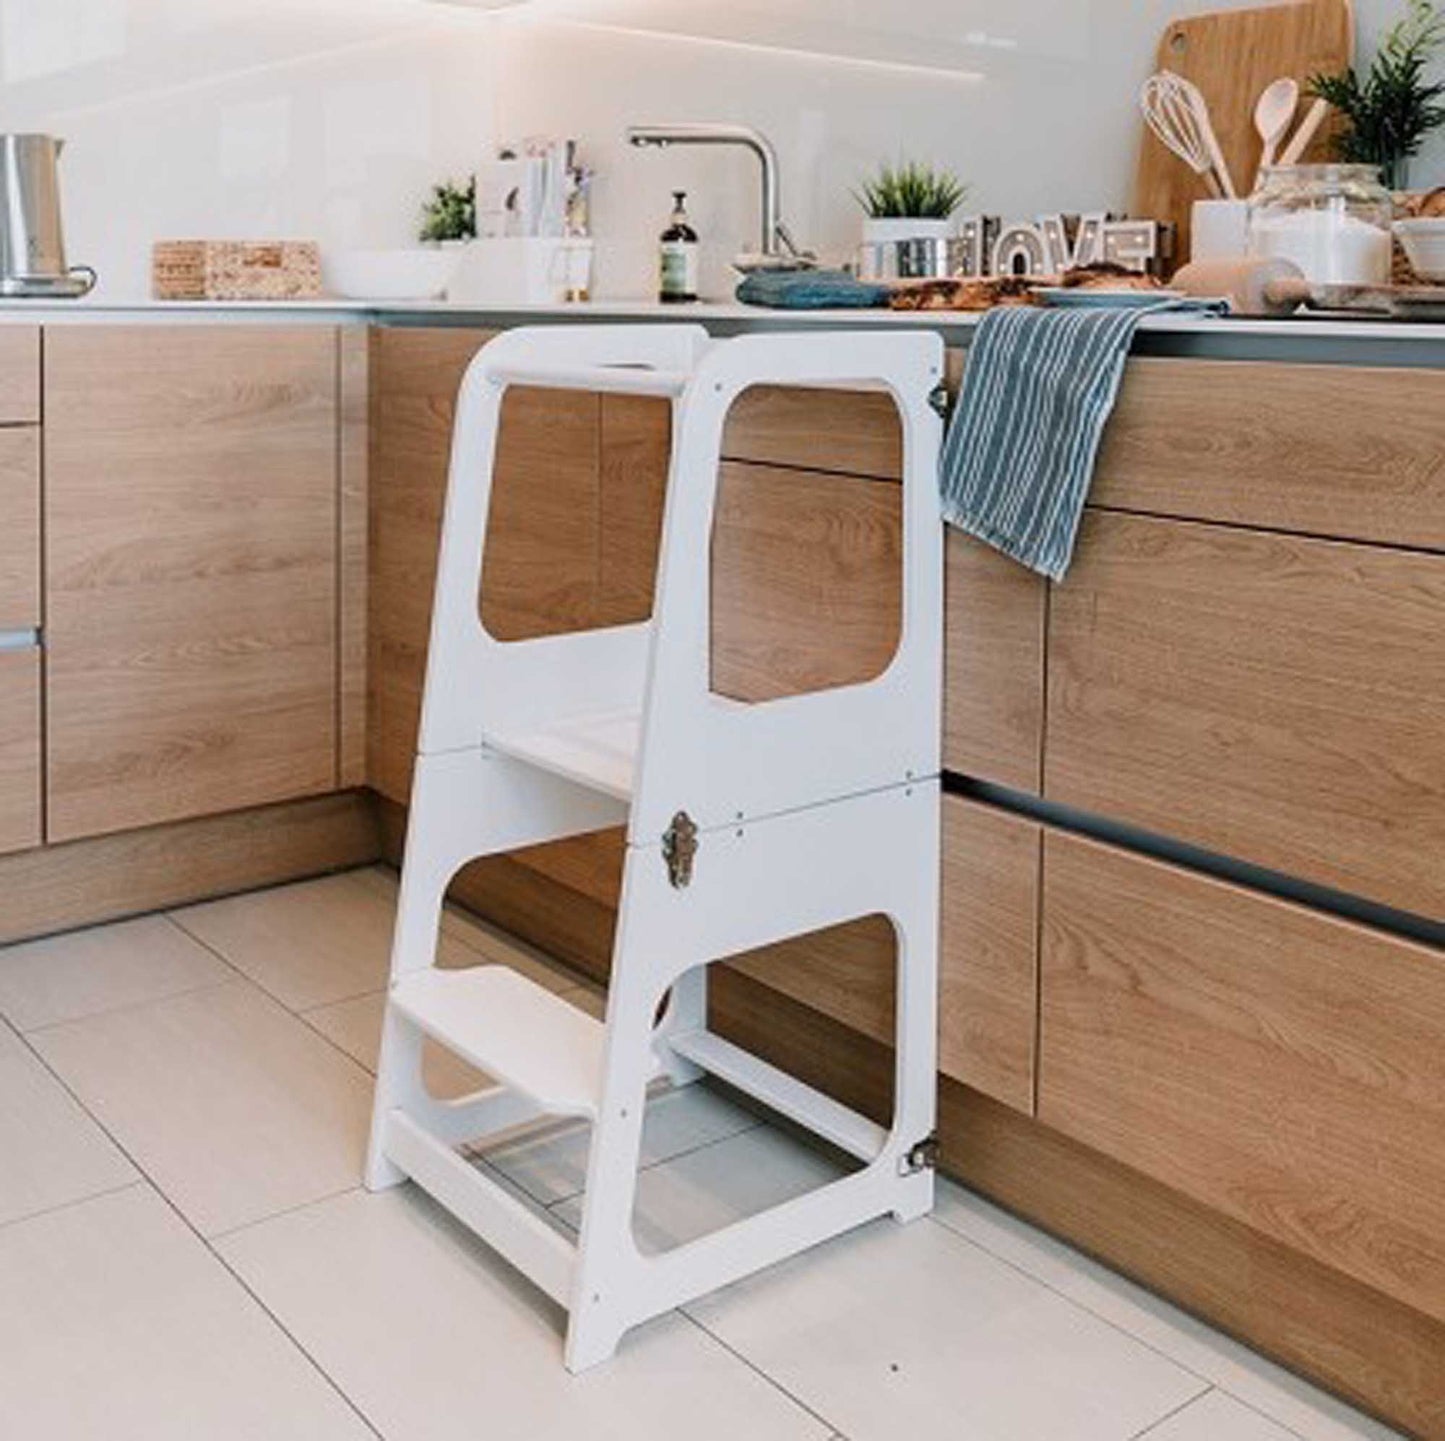 A 2-in-1 Convertible kitchen tower - table and chair in a kitchen, perfect for toddlers.